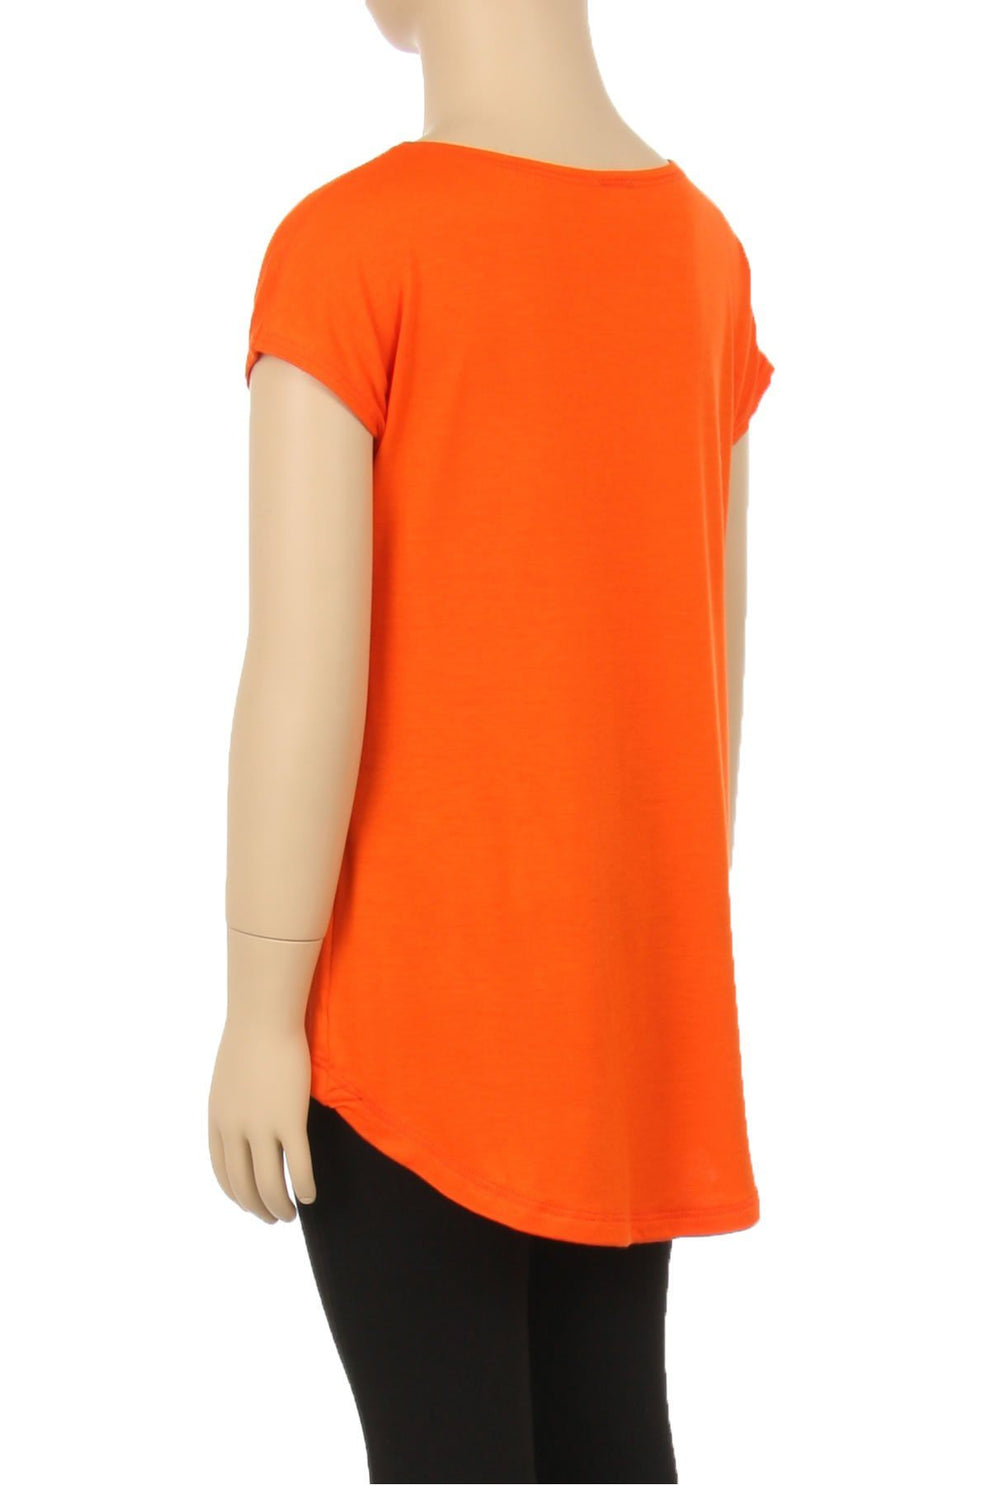 Girls Best Top Kids Solid Orange Short Sleeve Shirt – MomMe and More